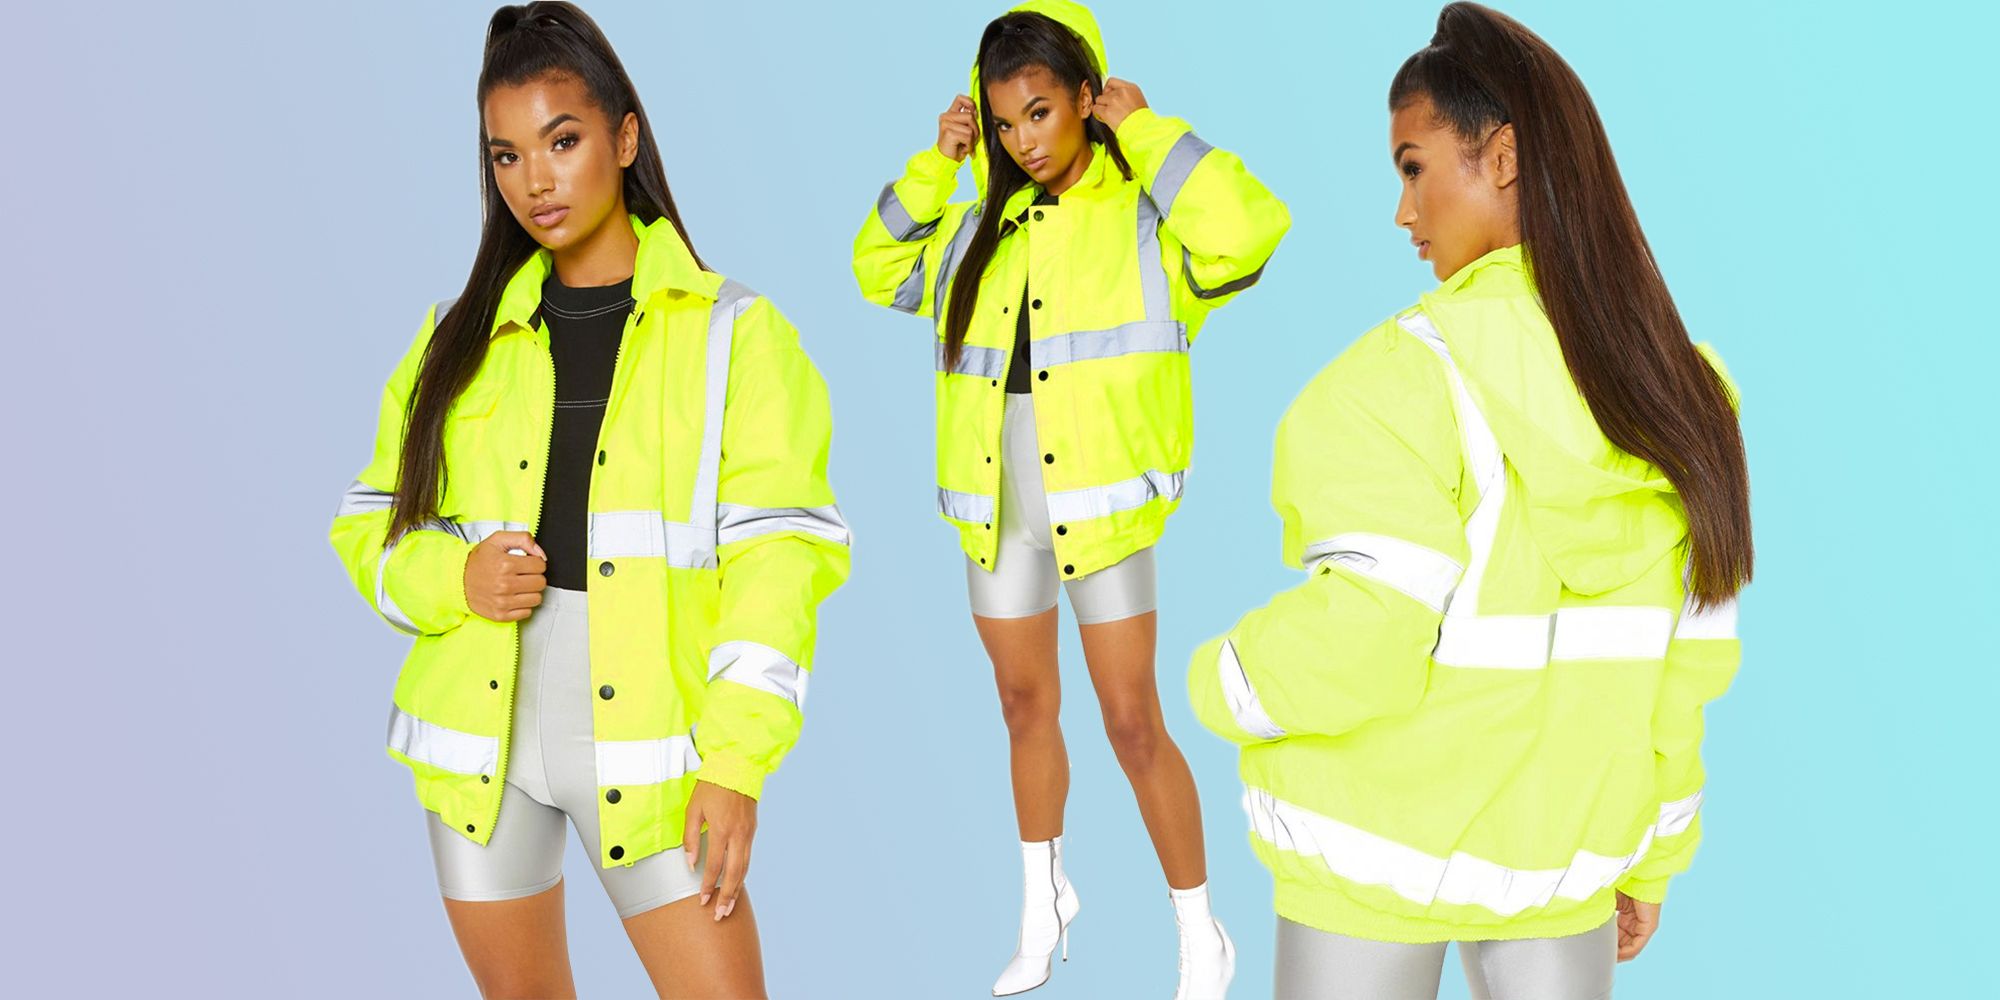 Pretty Little Thing is selling a high vis jacket because safety first